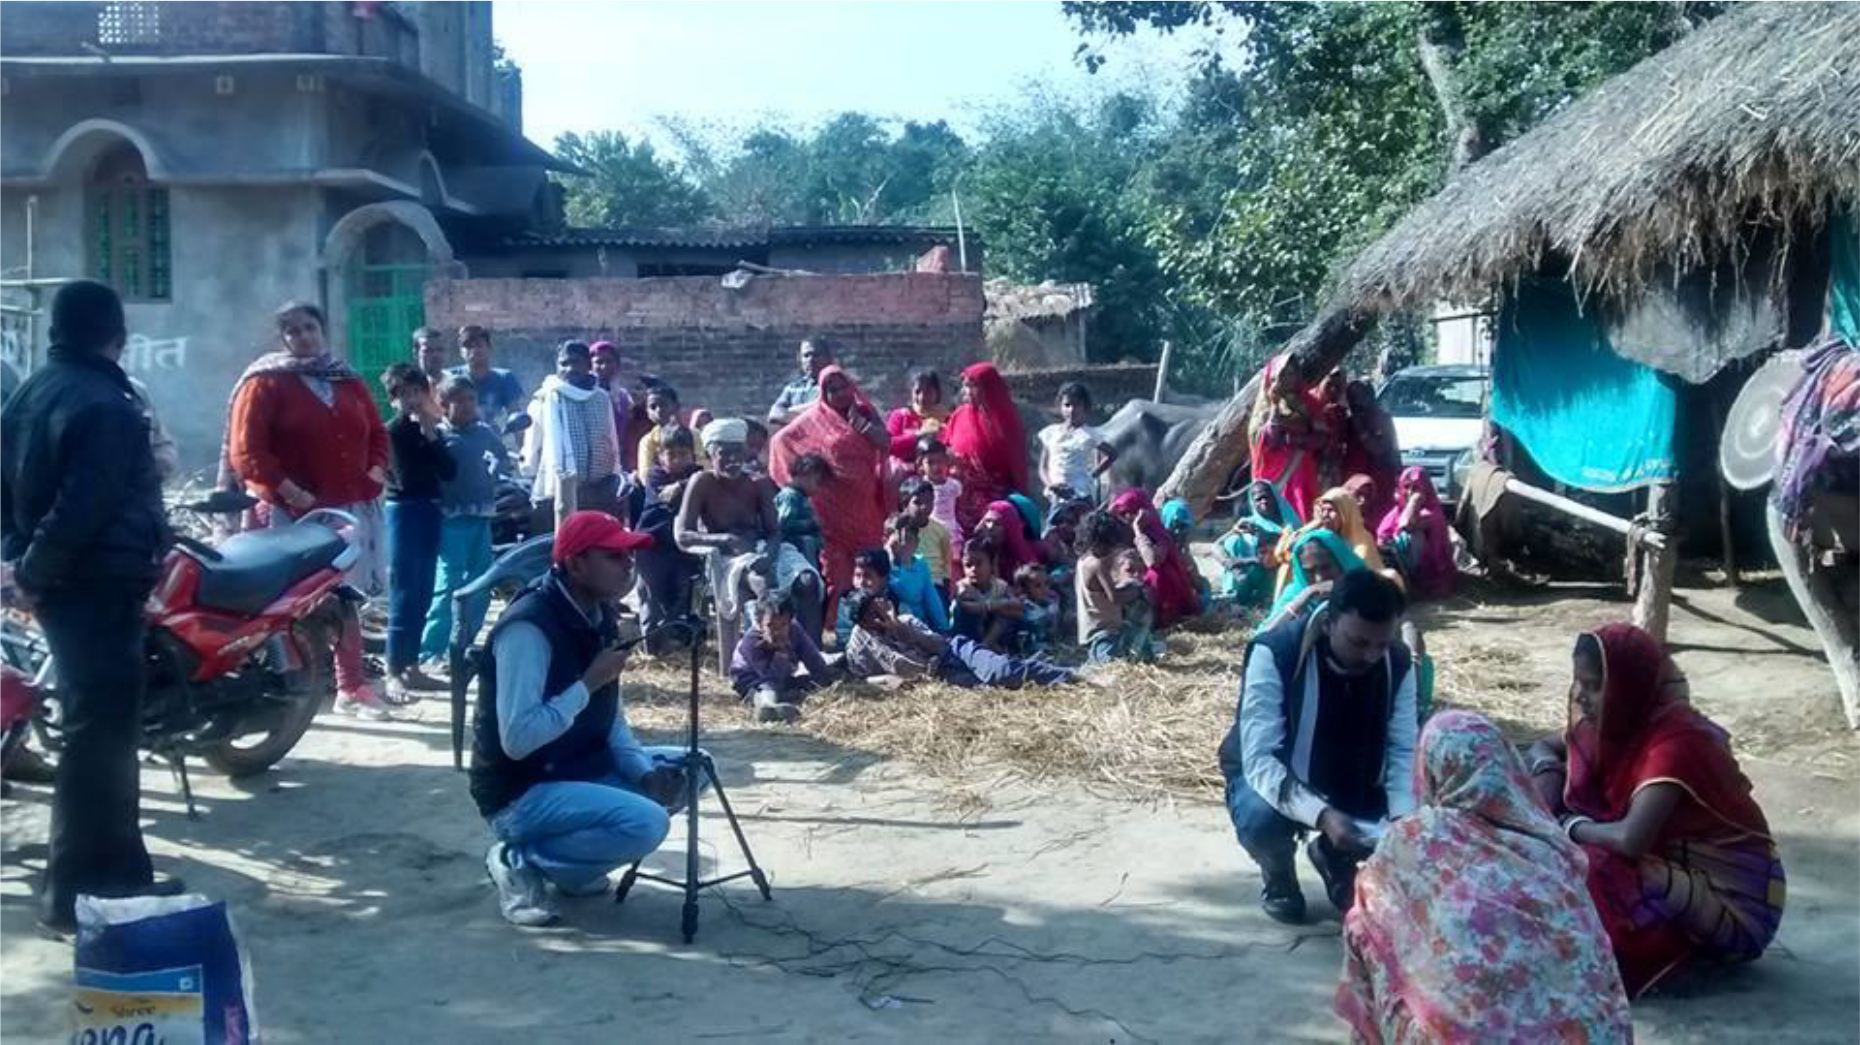 The image shows a scene from the village where some professionals are shooting a video of villagers. A big crowd of villagers is looking at this process.